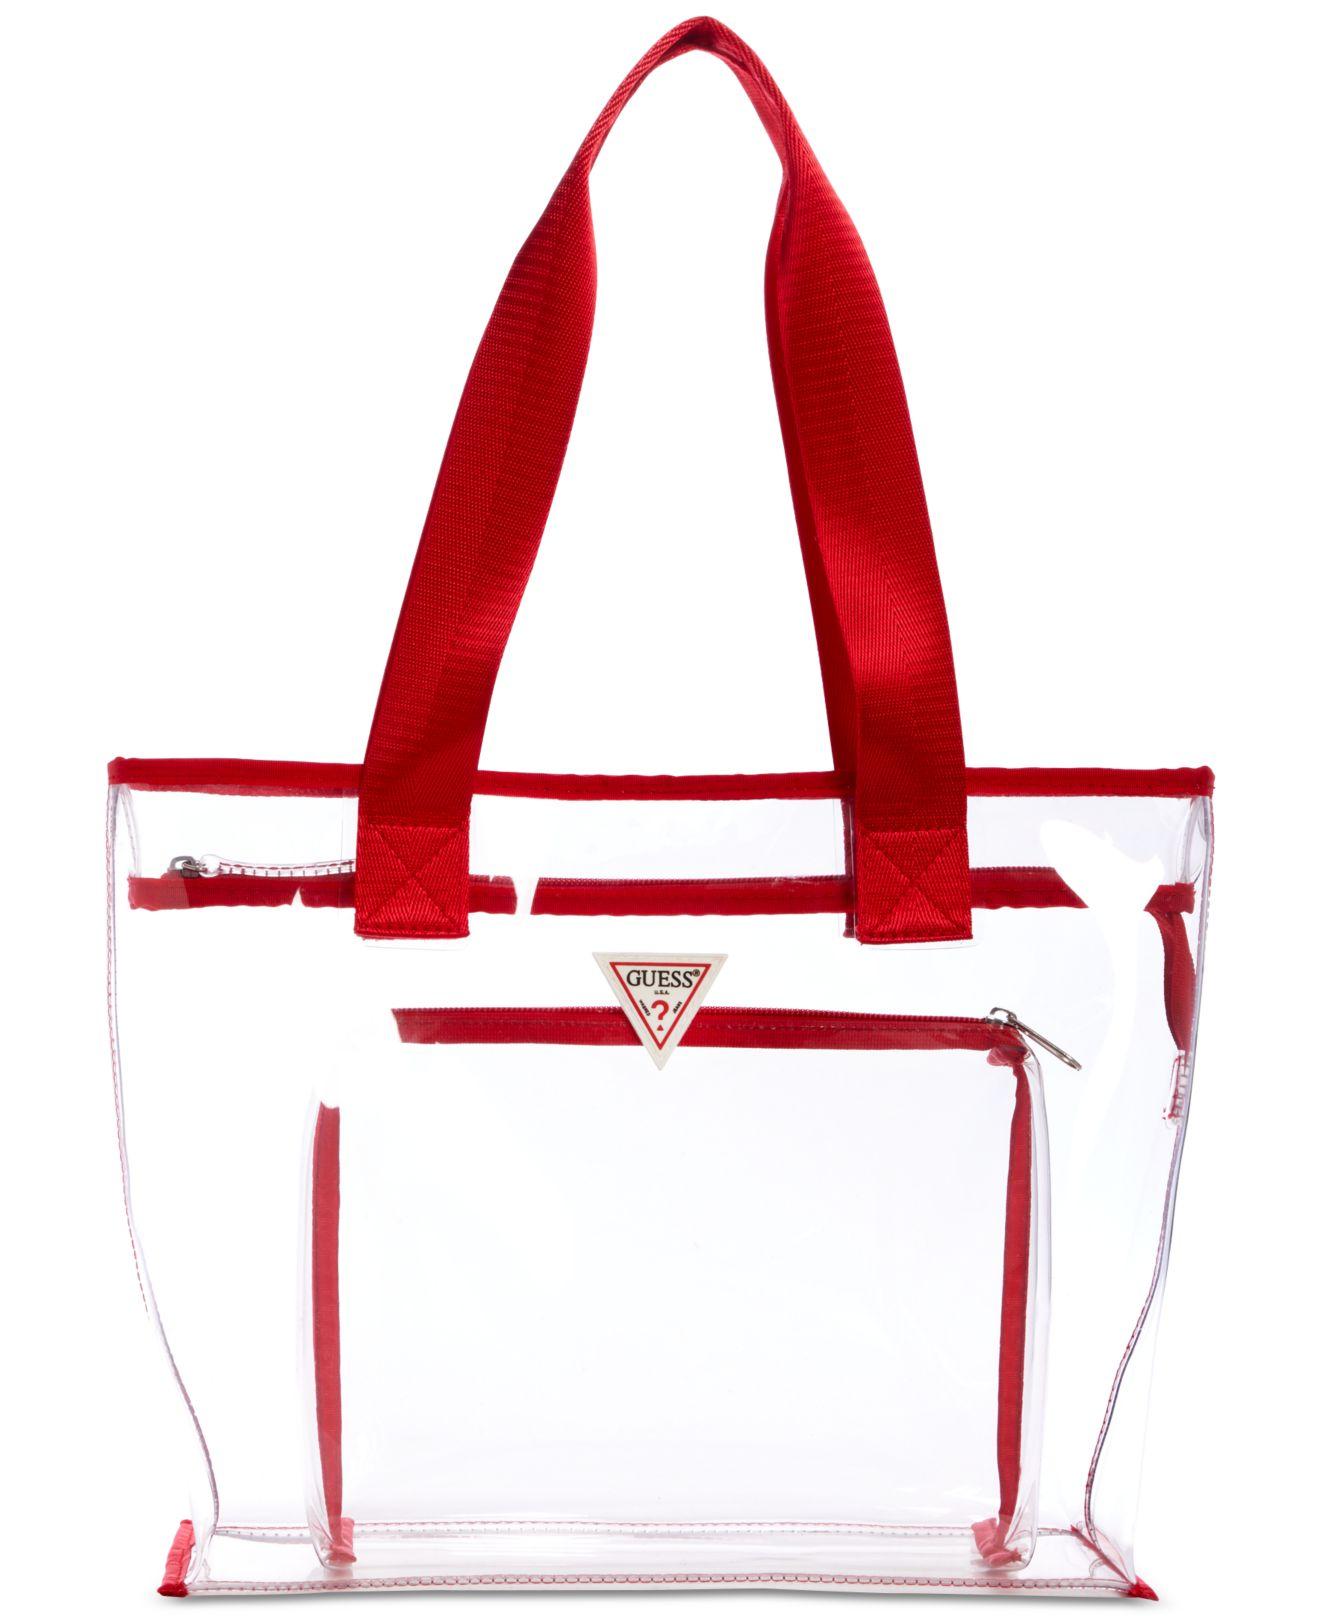 Guess Synthetic G Vision Clear Tote in Red/Silver (Red) - Lyst